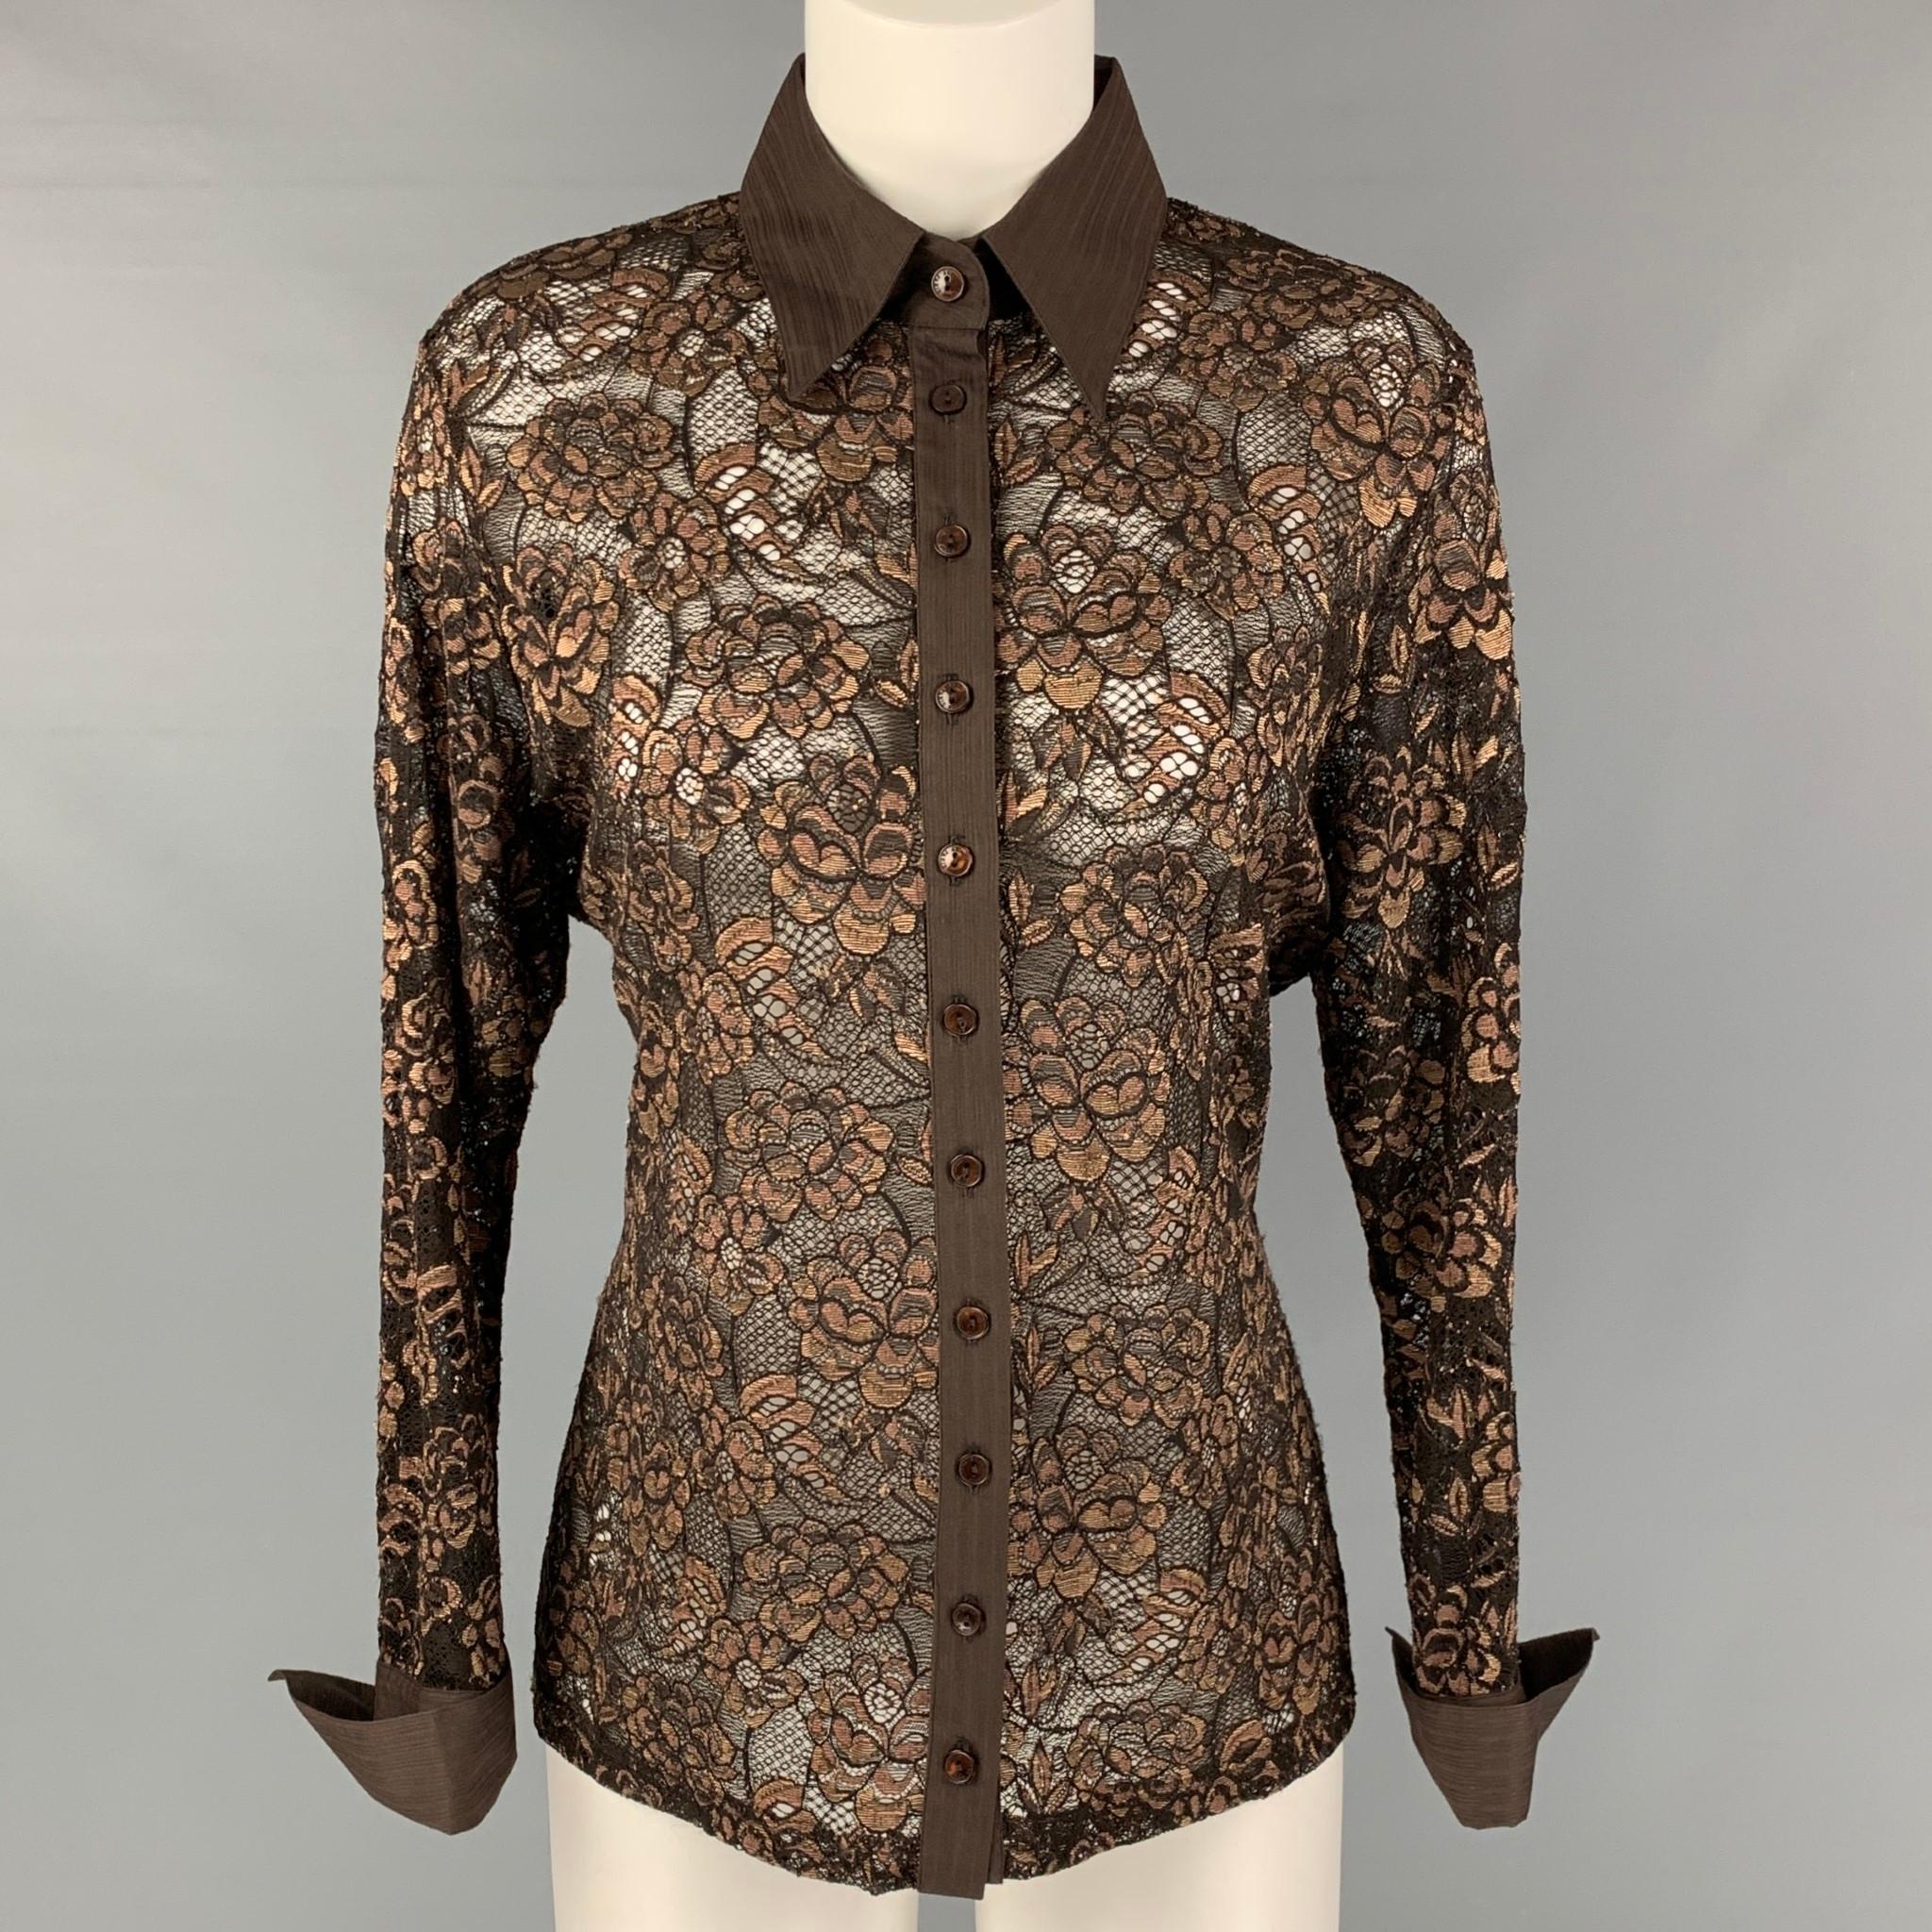 ANNE FONTAINE 3/4 sleeves shirt comes in a brown and gold lace featuring a straight collar, and button down closure. Made in France.

Very Good Pre-Owned Condition. Minor sign of wear. Fabric tags removed.
Marked: 5

Measurements:

Shoulder: 17